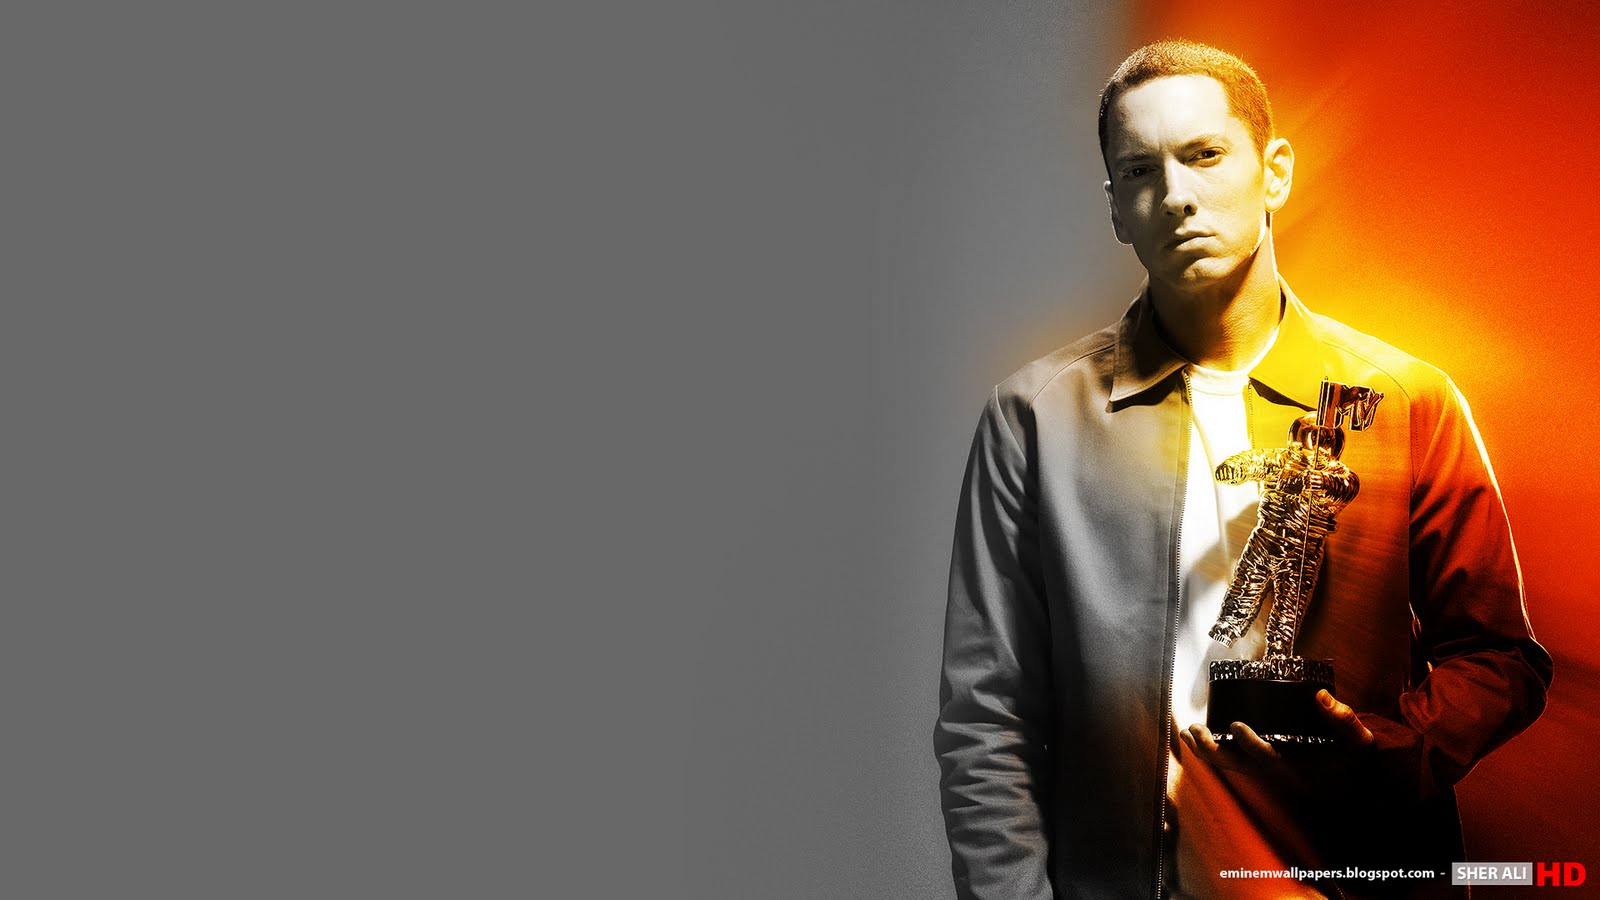 Colorful Background Eminem Quality HD Wallpaper